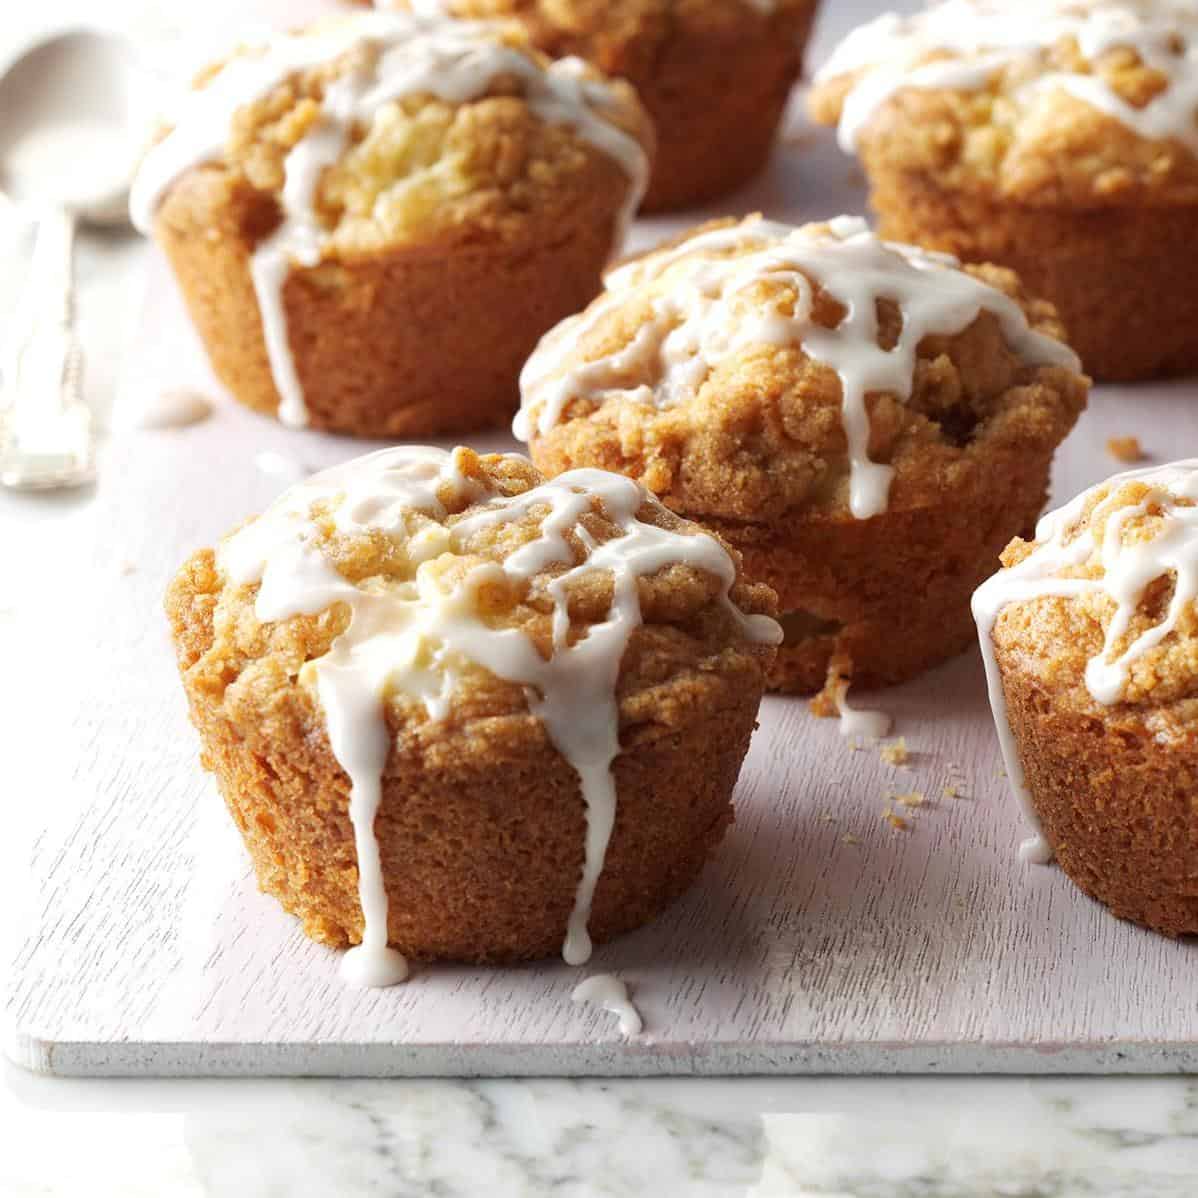  Warm and scrumptious apple scrapple muffins, ready to be devoured